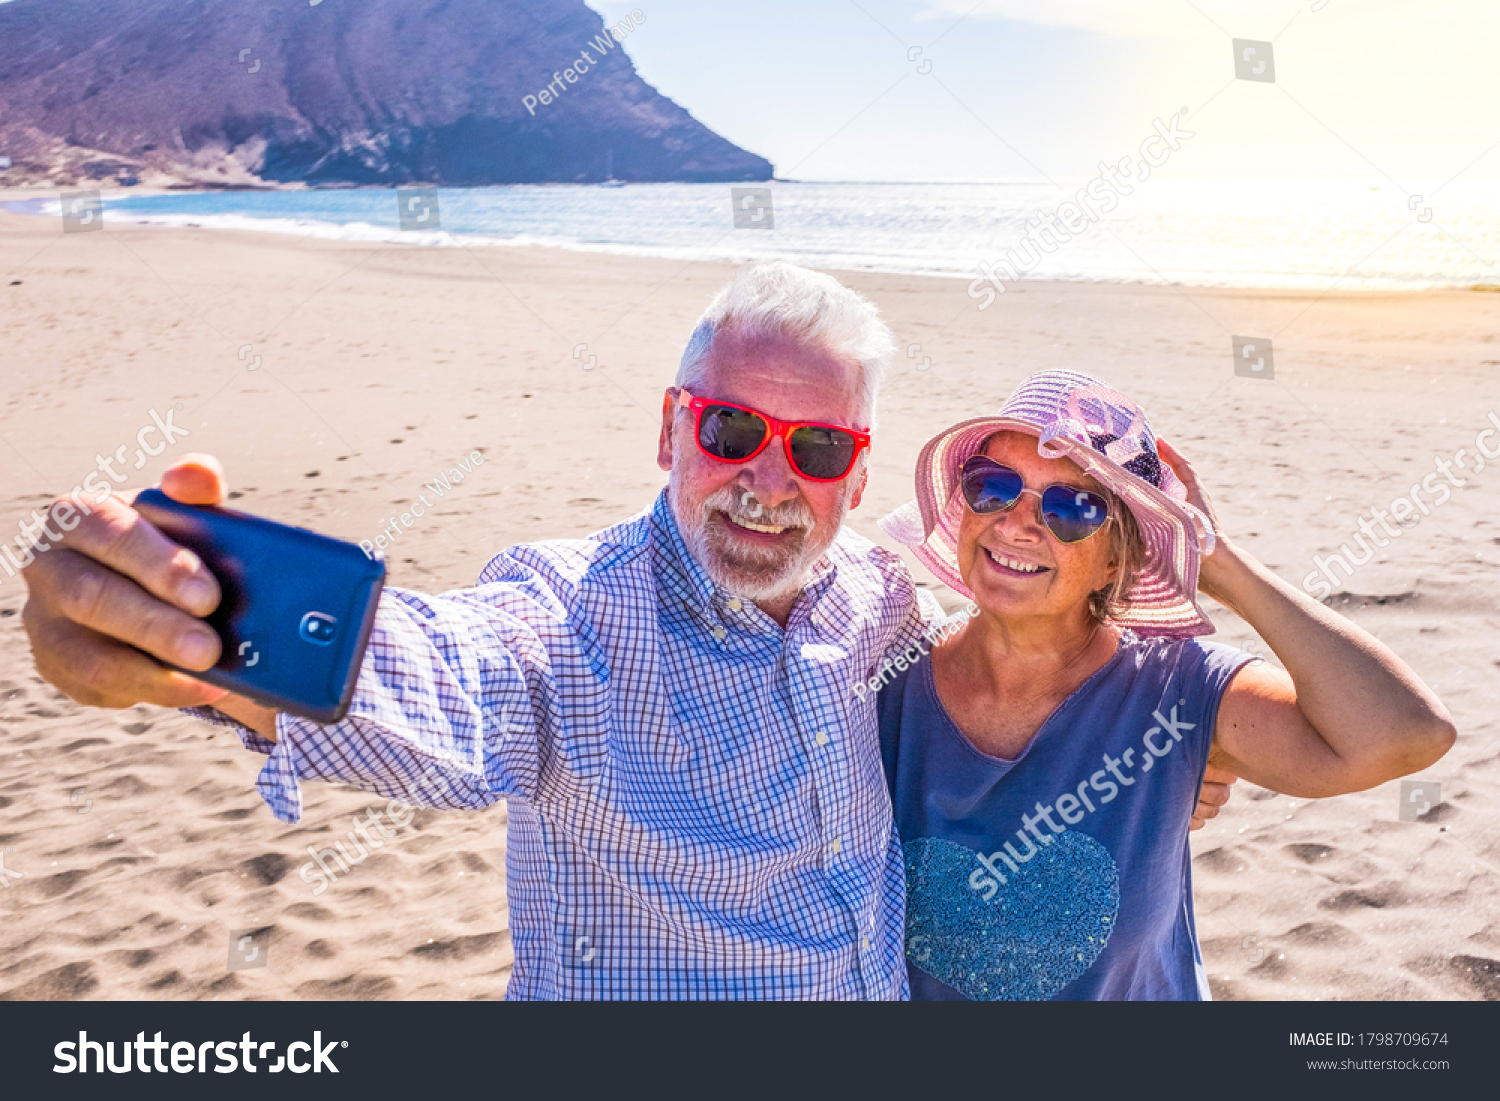 couple of mature people or pensioners enjoying their vacations and summer time together on the sand of the beach with the sea or ocean at the background - two retired senior taking a selfie smiling #1798709674